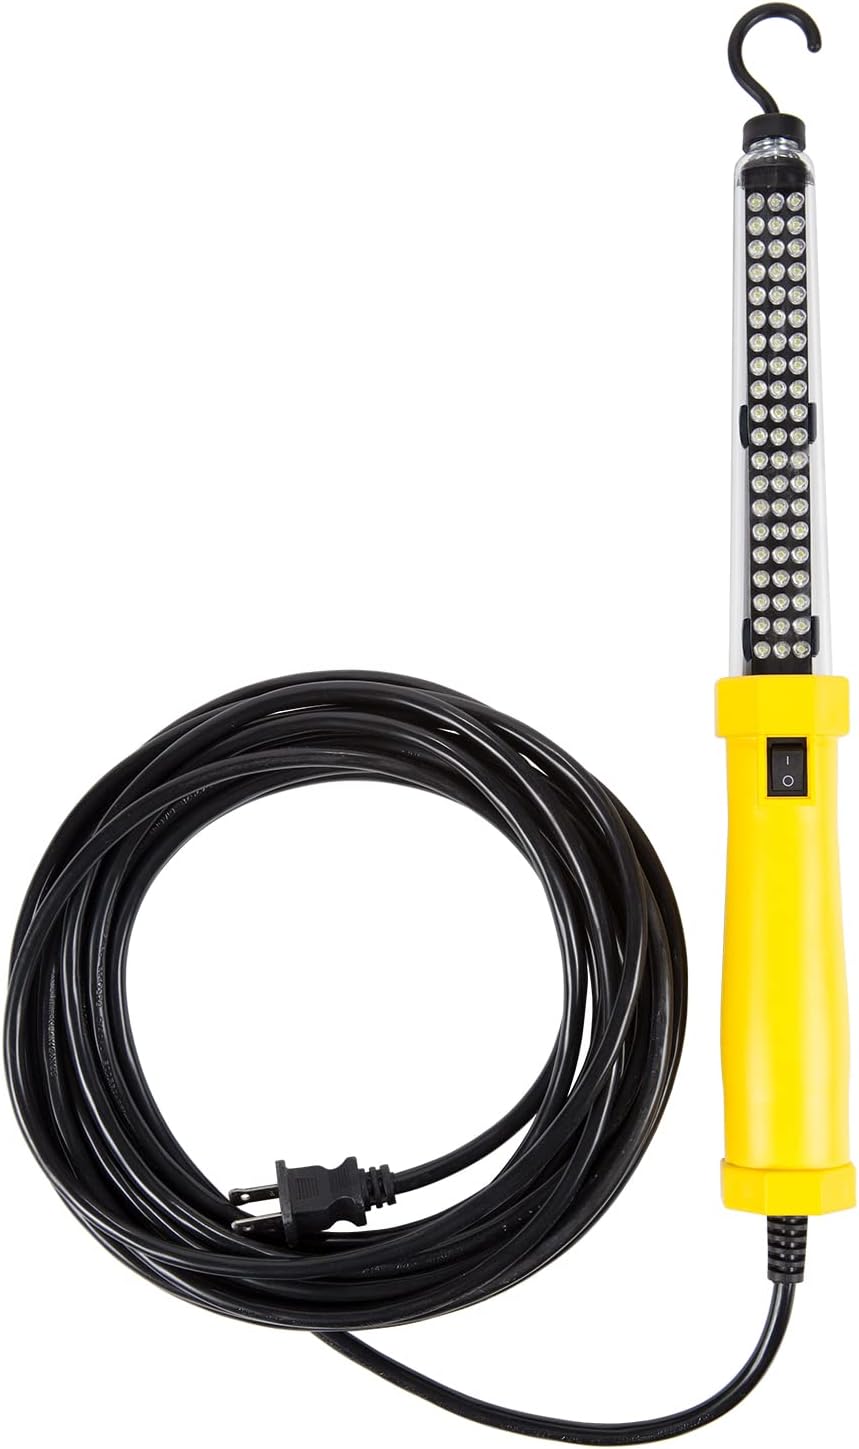 Bayco SL-2125 25 Foot Cord Corded LED Work Light with [...]